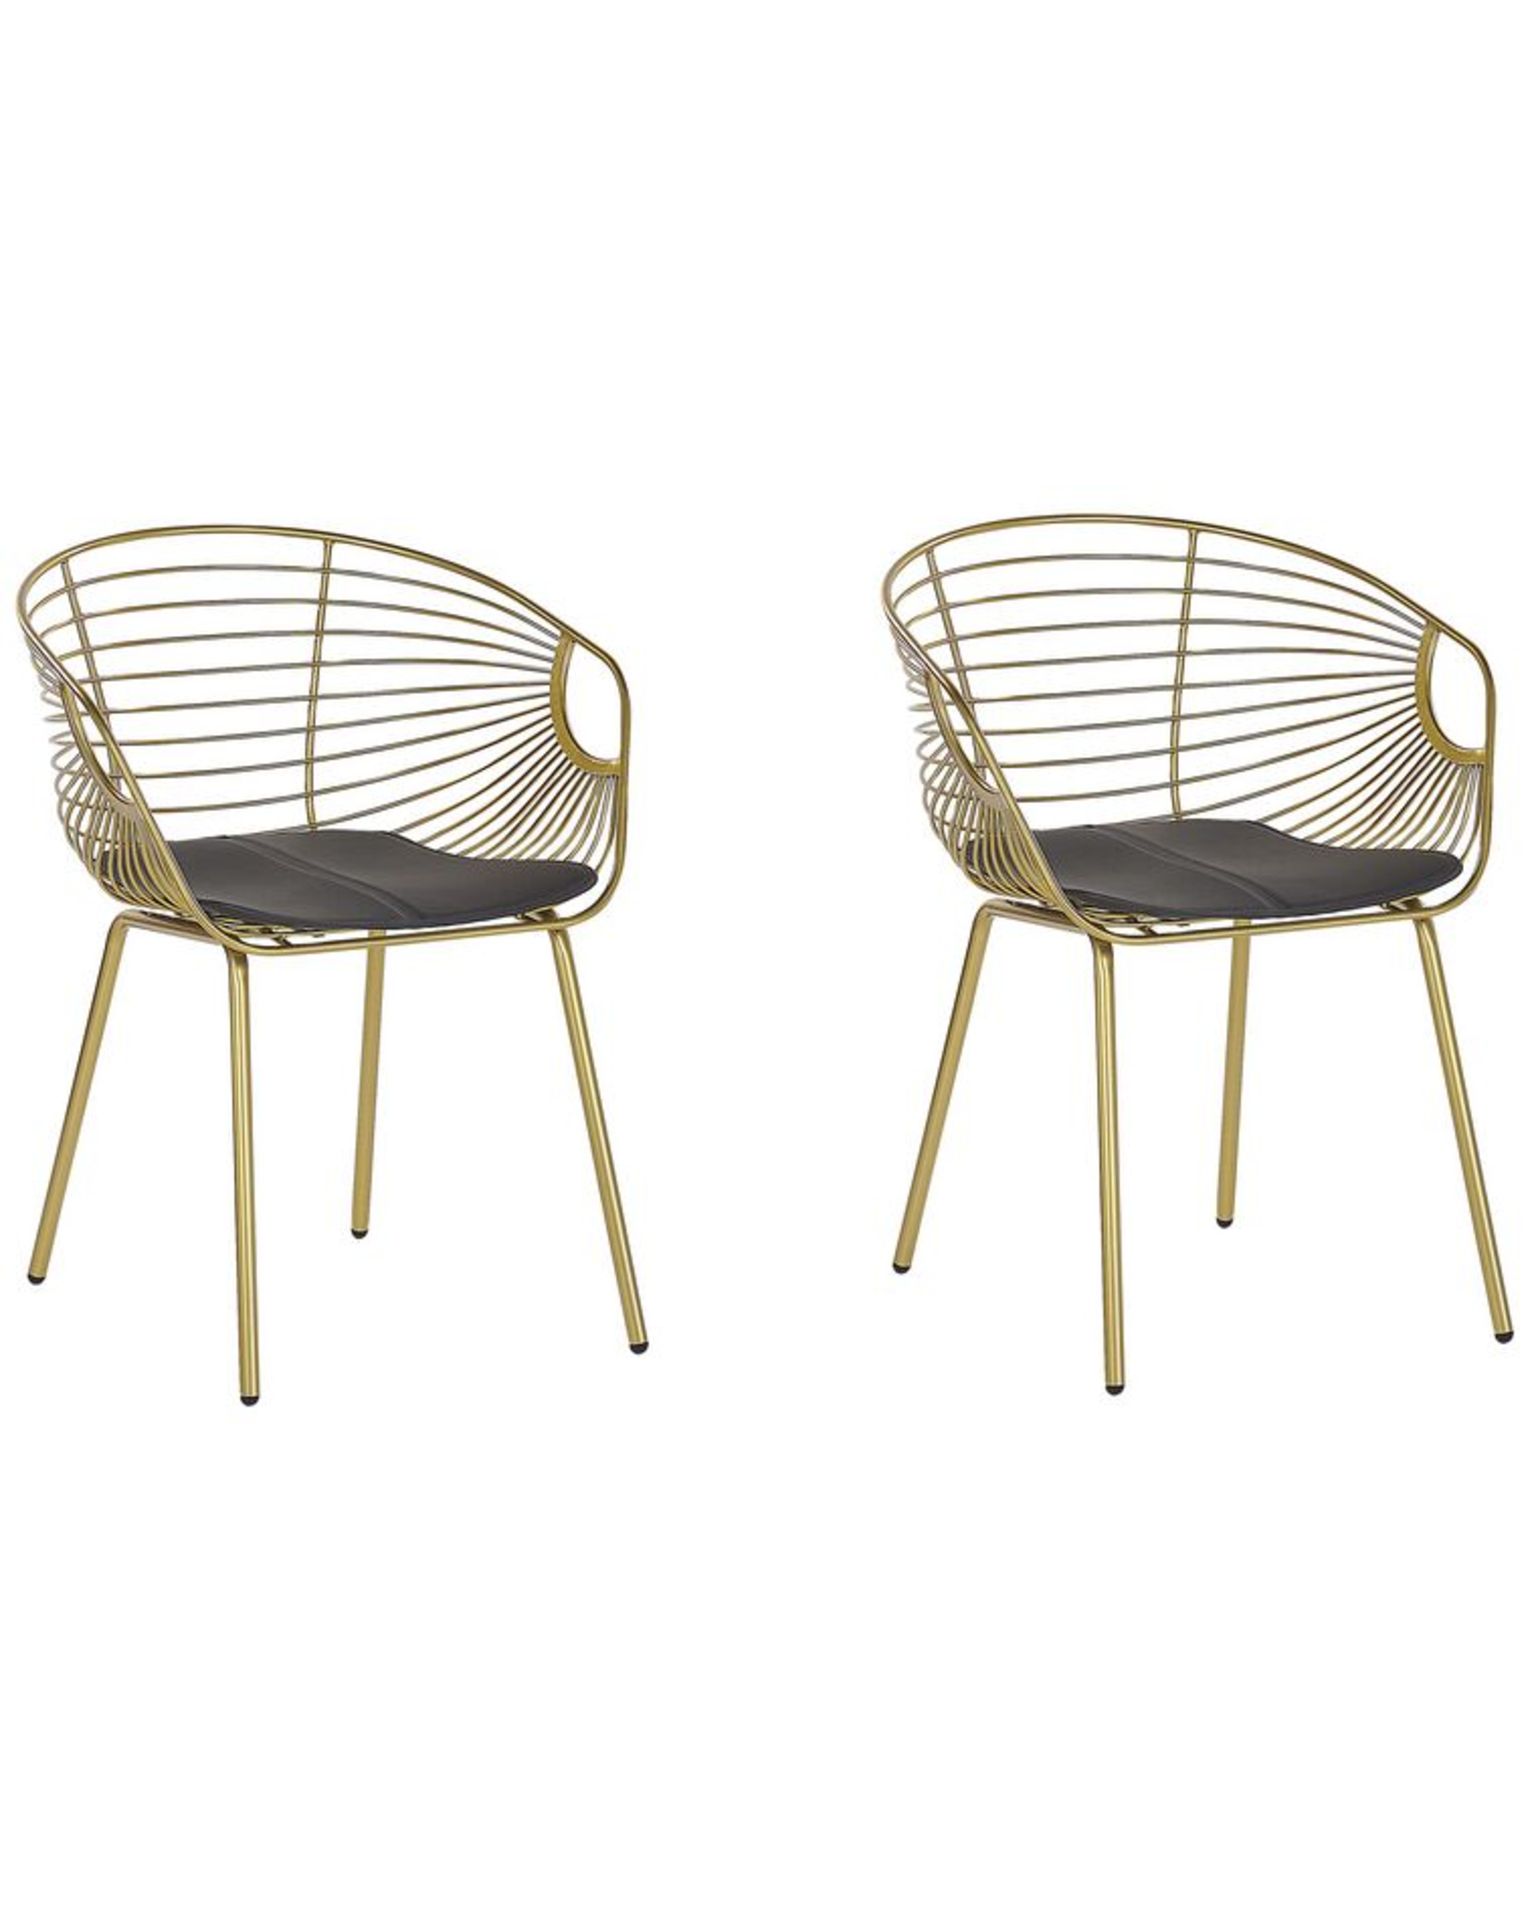 Hoback Set of 2 Metal Dining Chairs Gold . - R14.17. RRP £279.99. These inspired by industrial forms